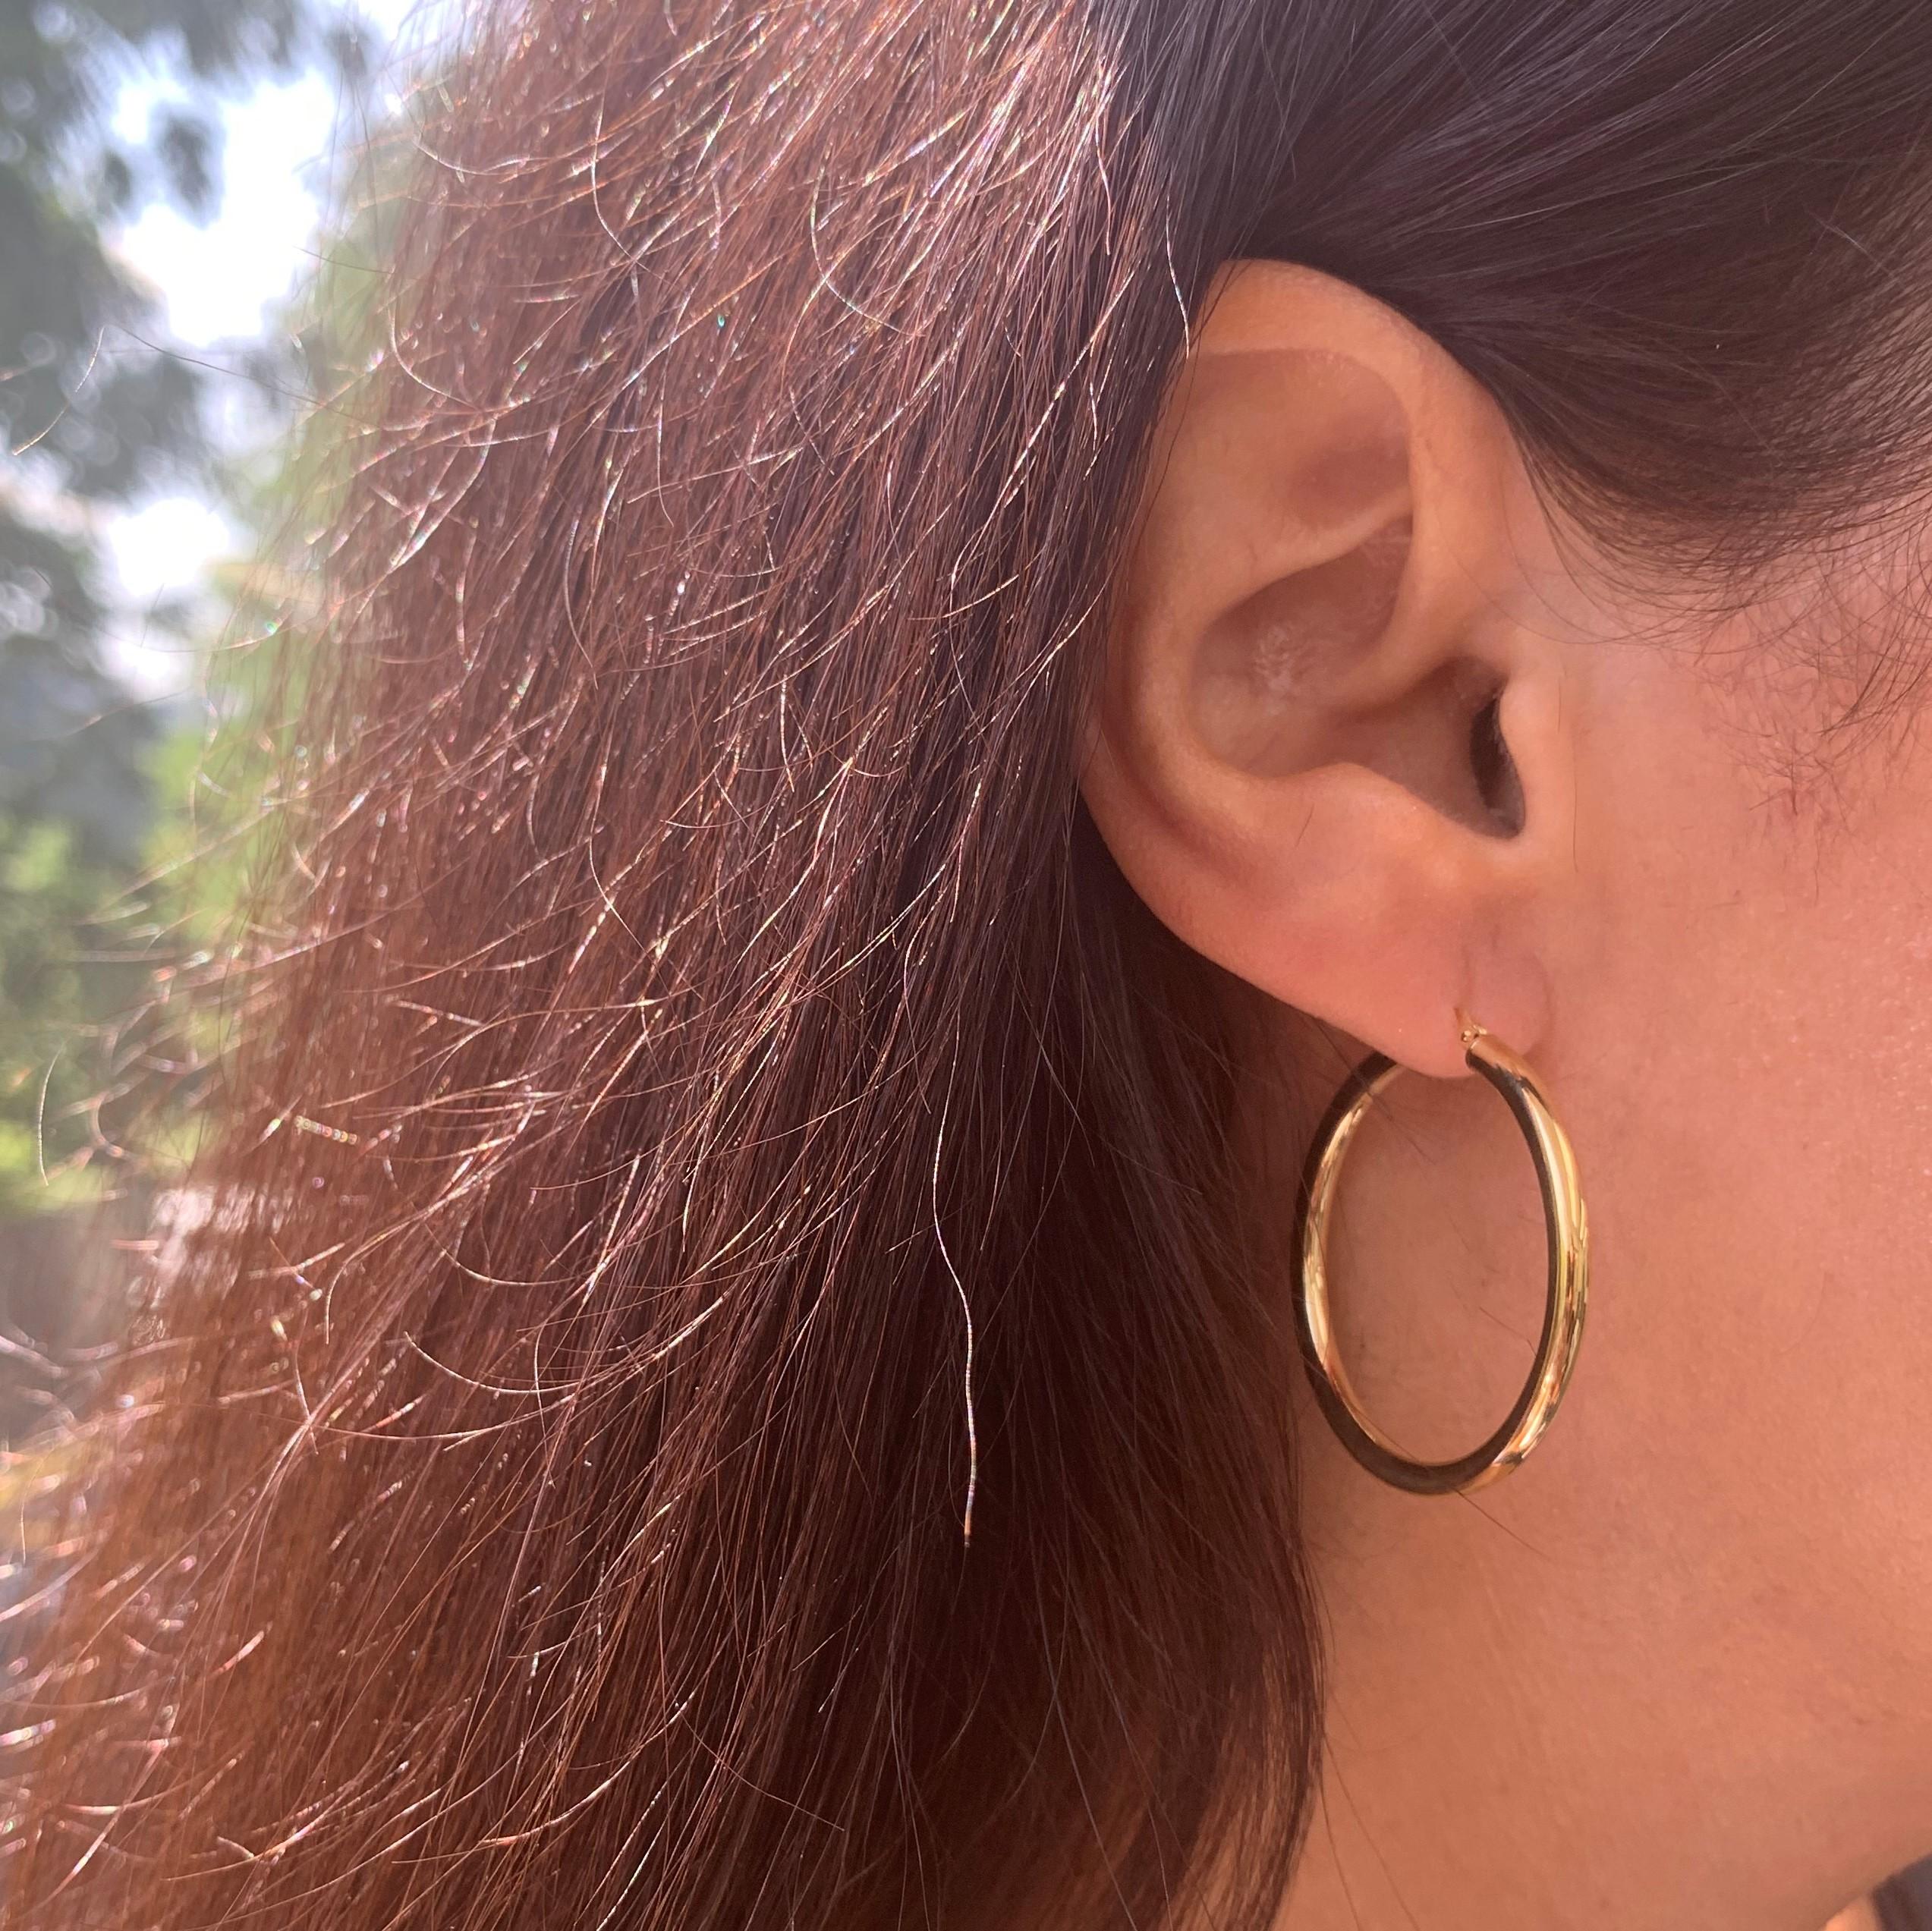 Quality Italian Design Hoops: Made and designed in Italy where craftsmen are known for their attention to design and detail, these earrings boast a chic 14k yellow gold hoop that will add a dash of glam to your everyday look. Diameter of Hoop is 1